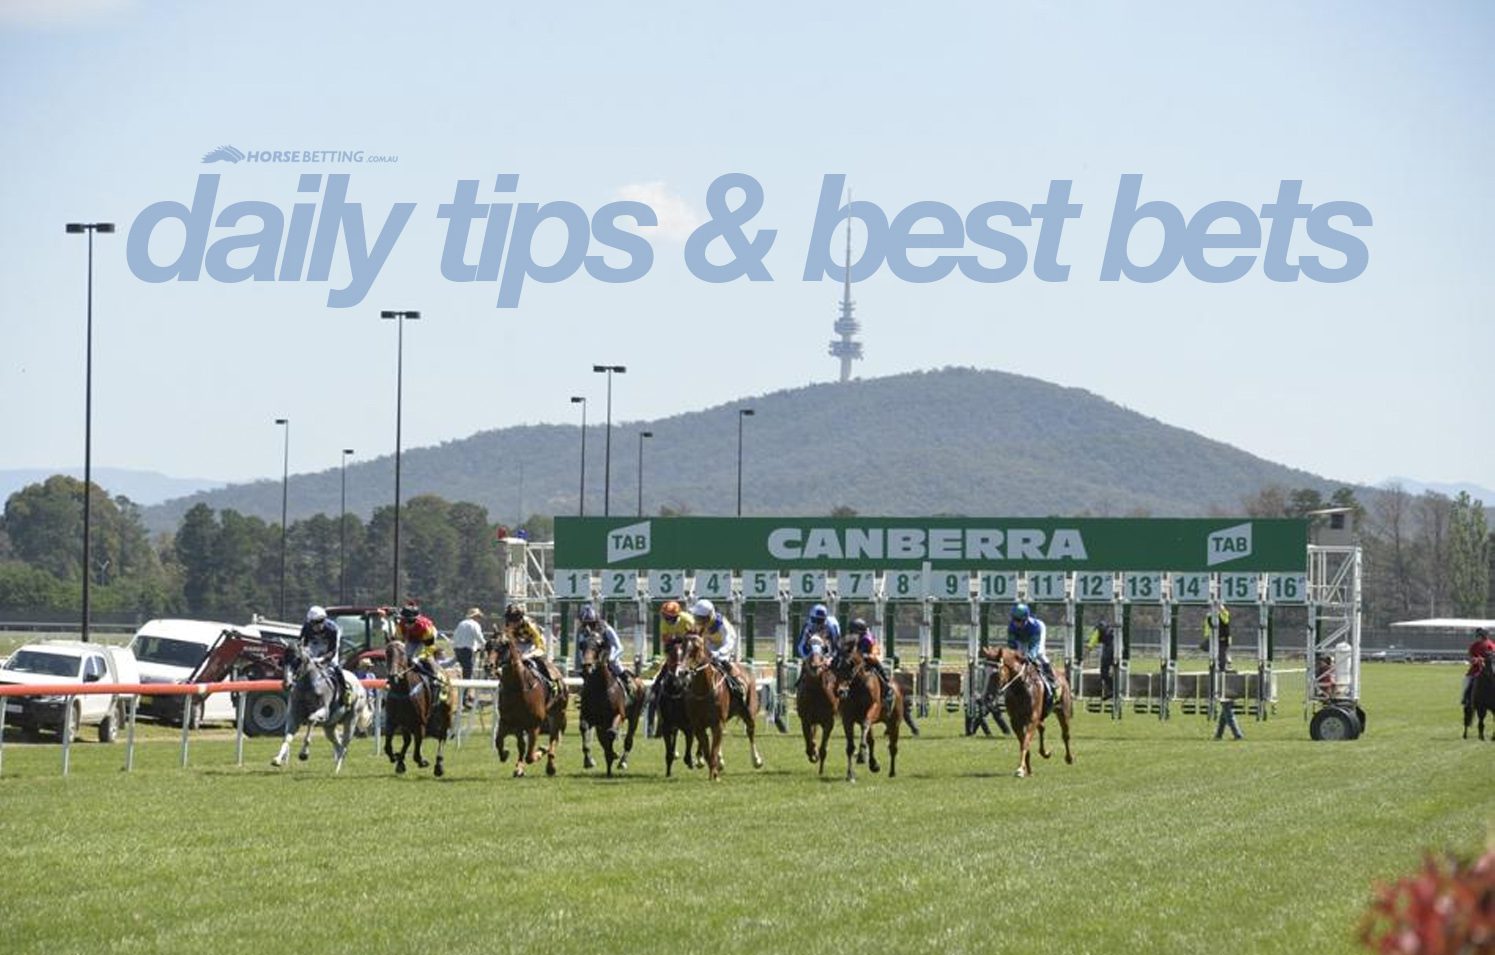 Friday horse racing tips & best bets | February 24, 2023